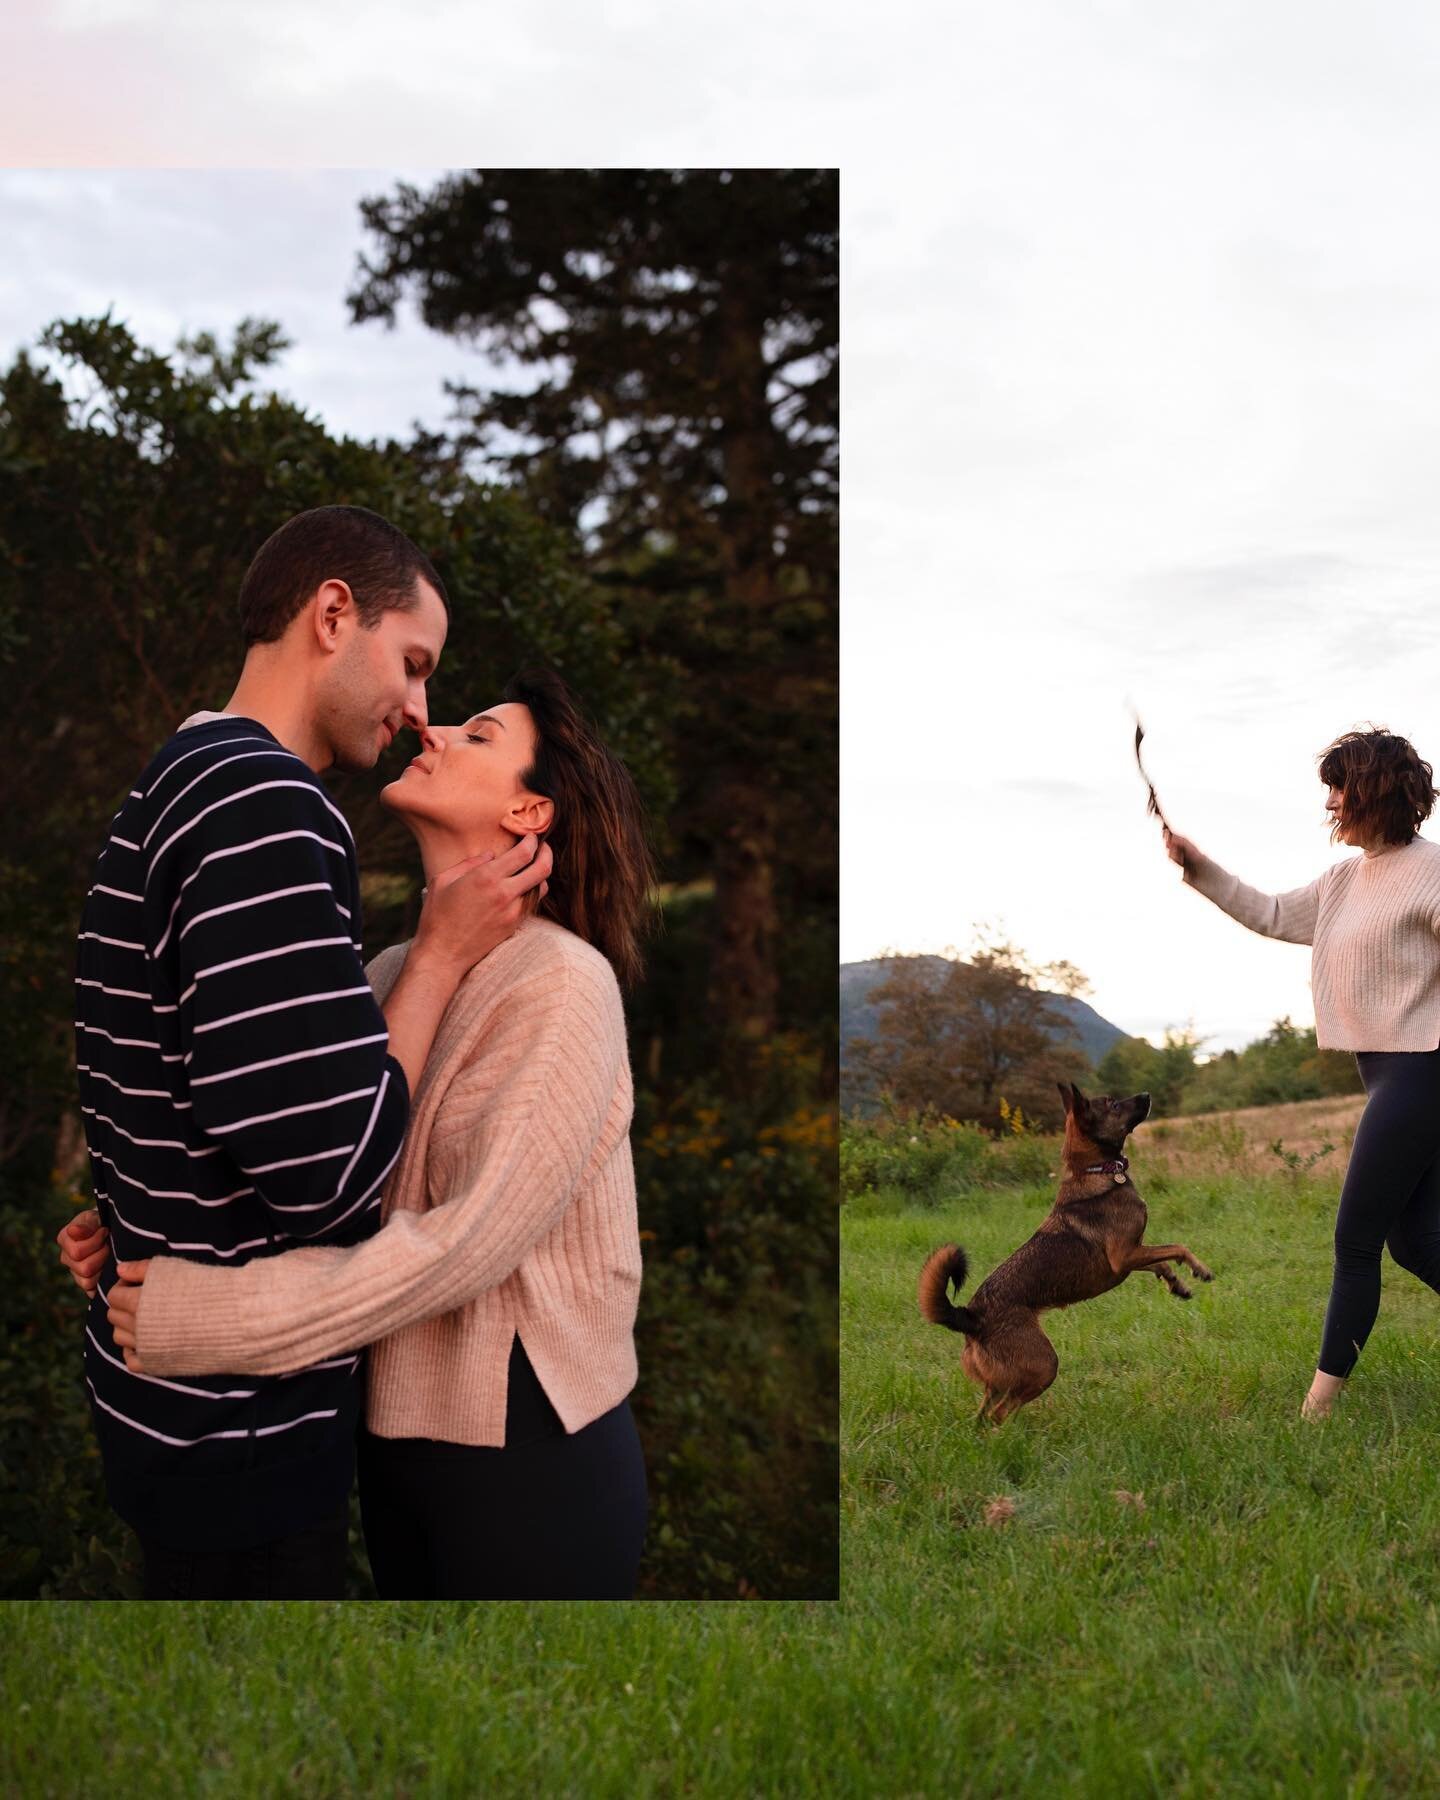 A few more from Mimi and Mikes shoot Friday. They&rsquo;ve been married for 6 years and boy is the spark alive and burning between these two. Looking for more couples who want to run around in fields and splash in lakes and hold each other.